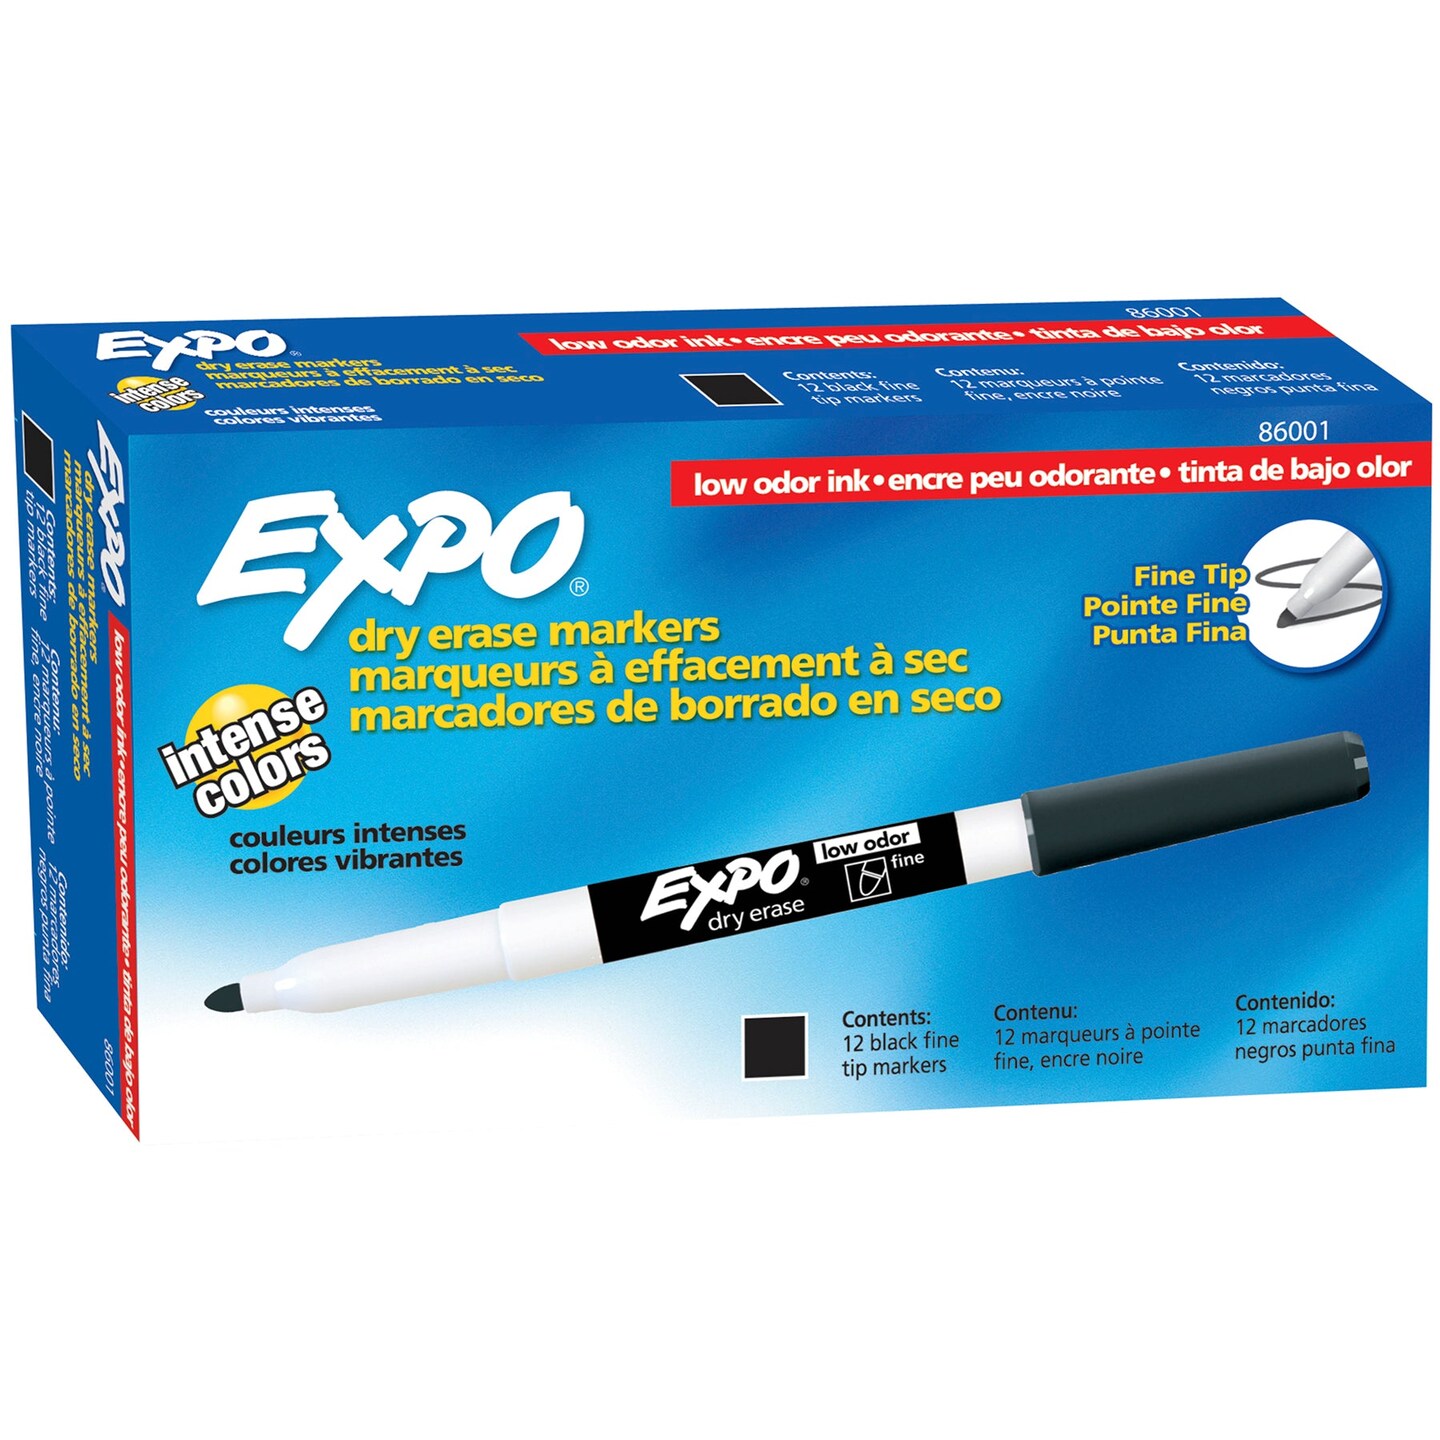 Low-Odor Dry Erase Markers